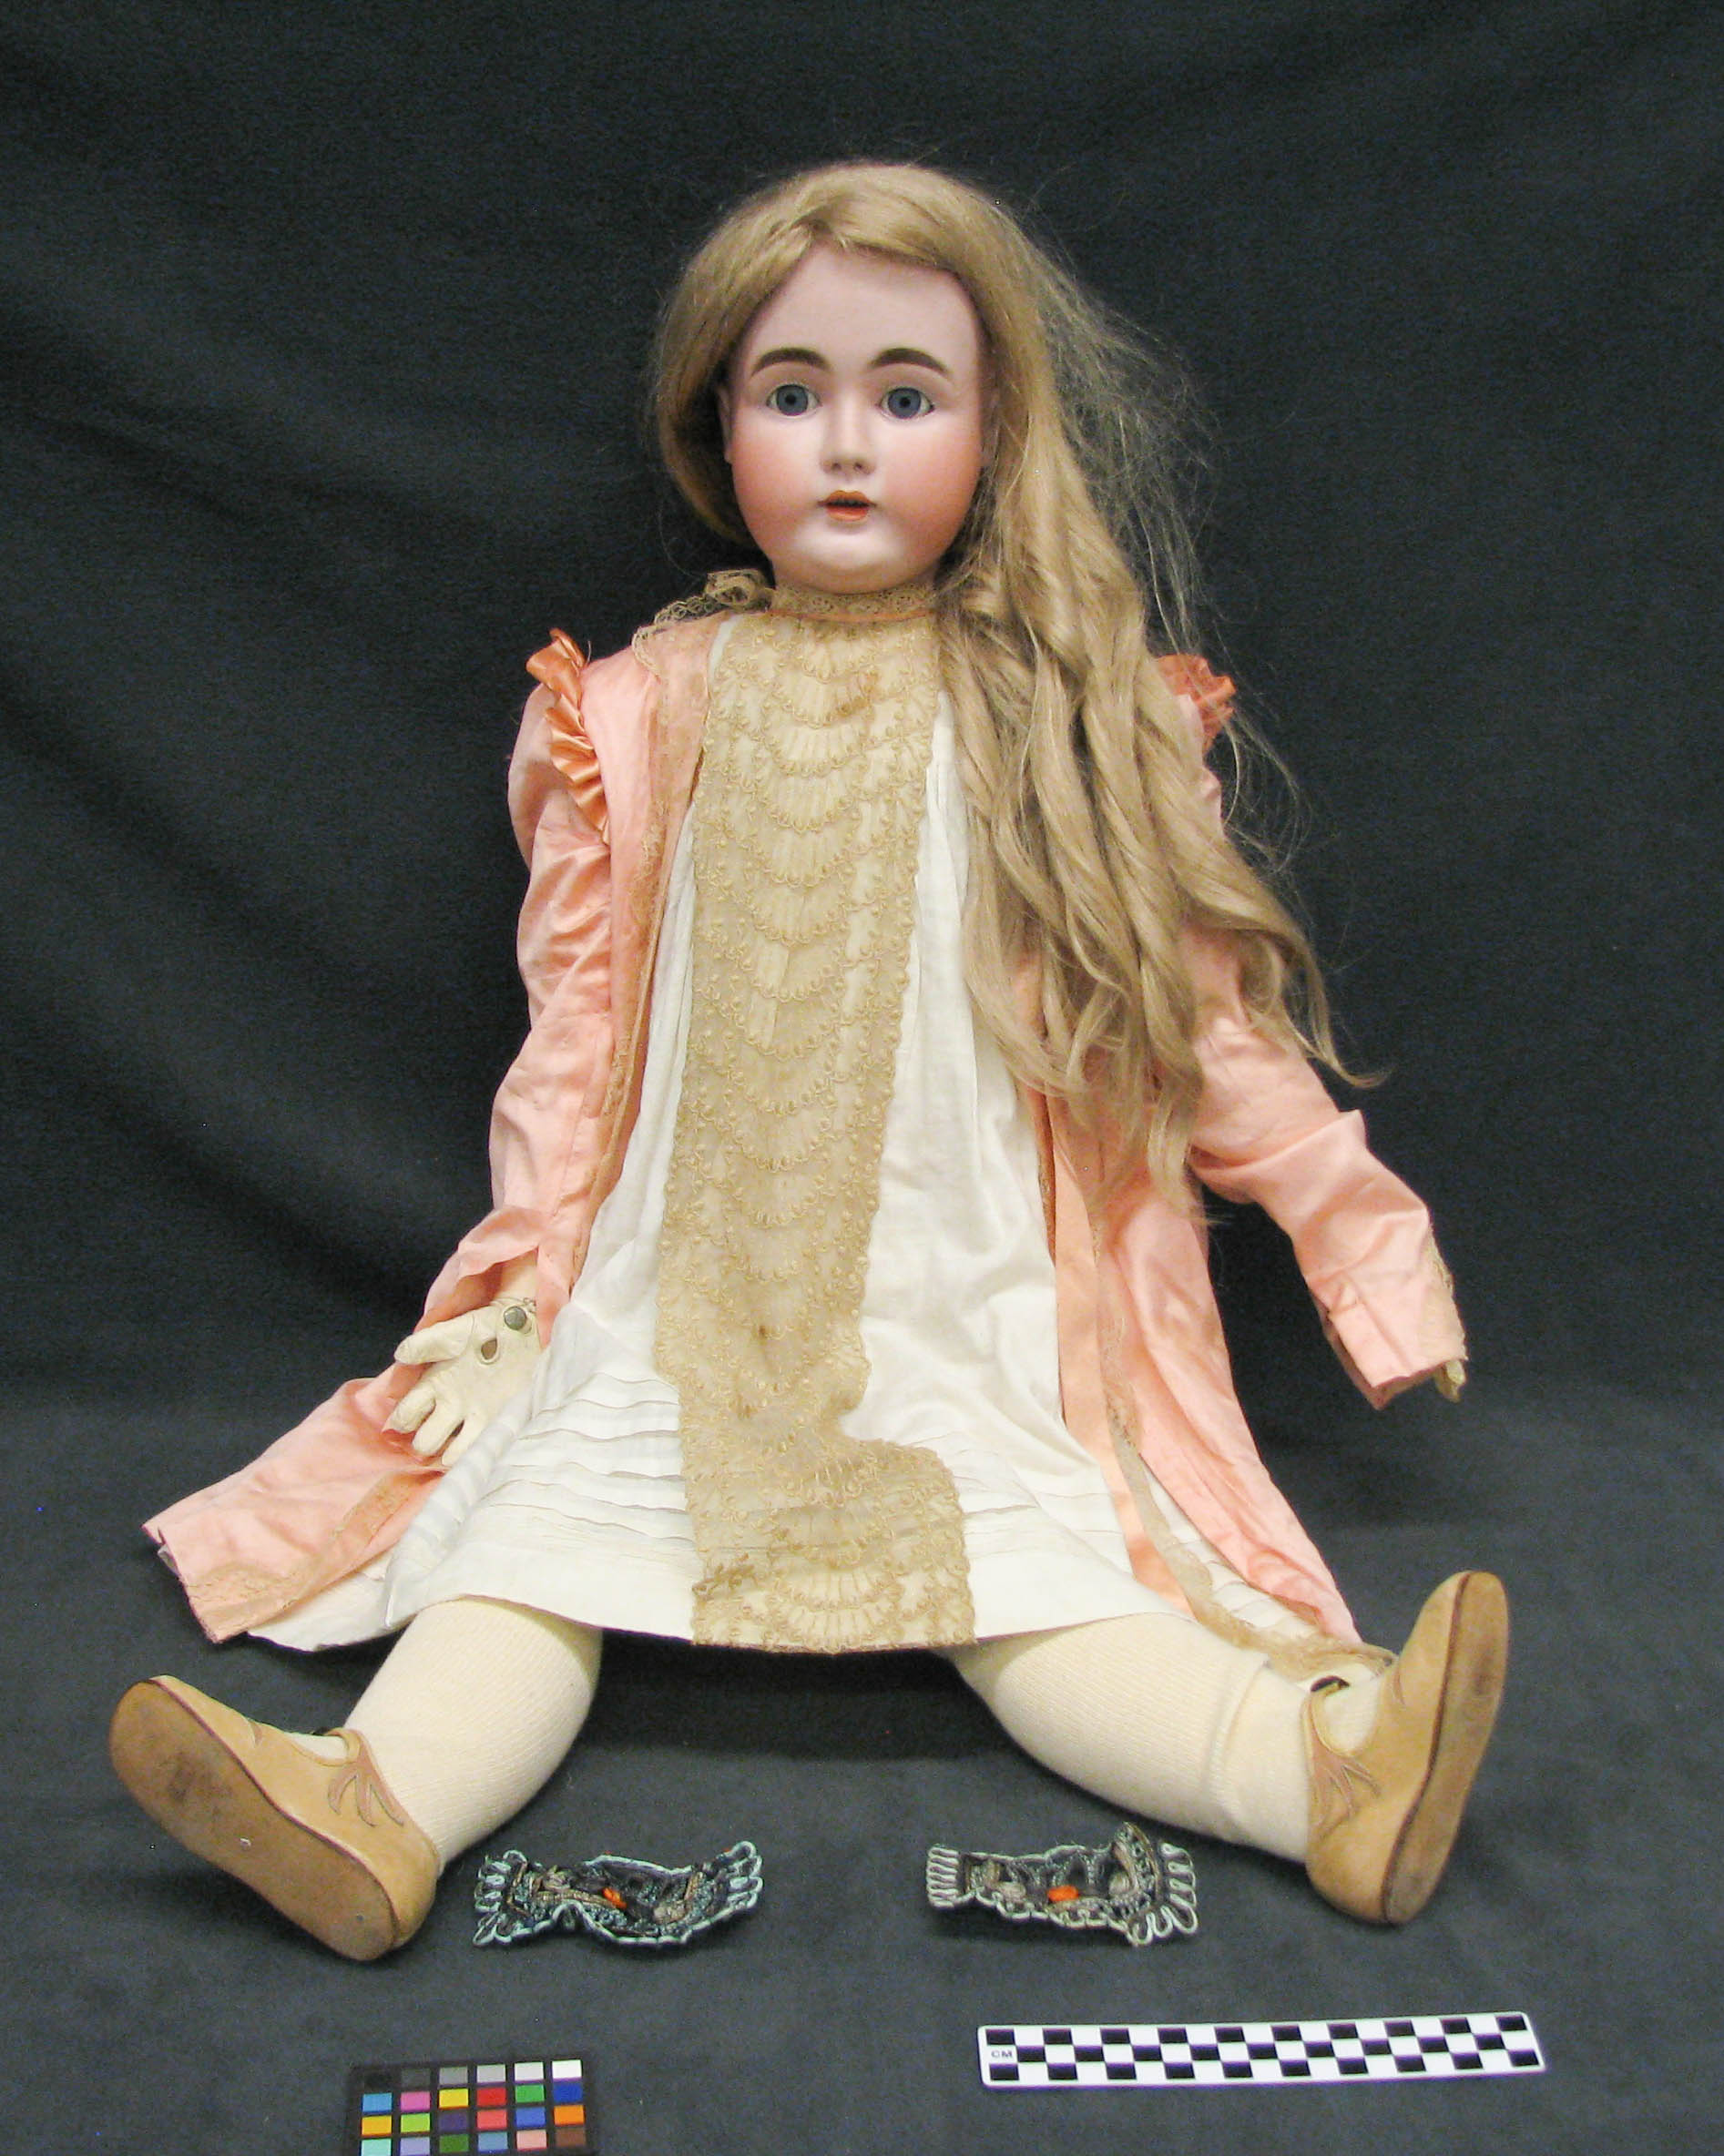 Photo of a porcelain doll, sitting upright against a black draped background. She is wearing a pink dress and shoes with white gloves and stockings. She has long blonde hair that falls in ringlets over her shoulders. She has blue eyes, pink full cheeks, and painted brown eyebrows. She is placed next to color swatches and measuring strips to document her size and colors for the purpose of the museum collection.